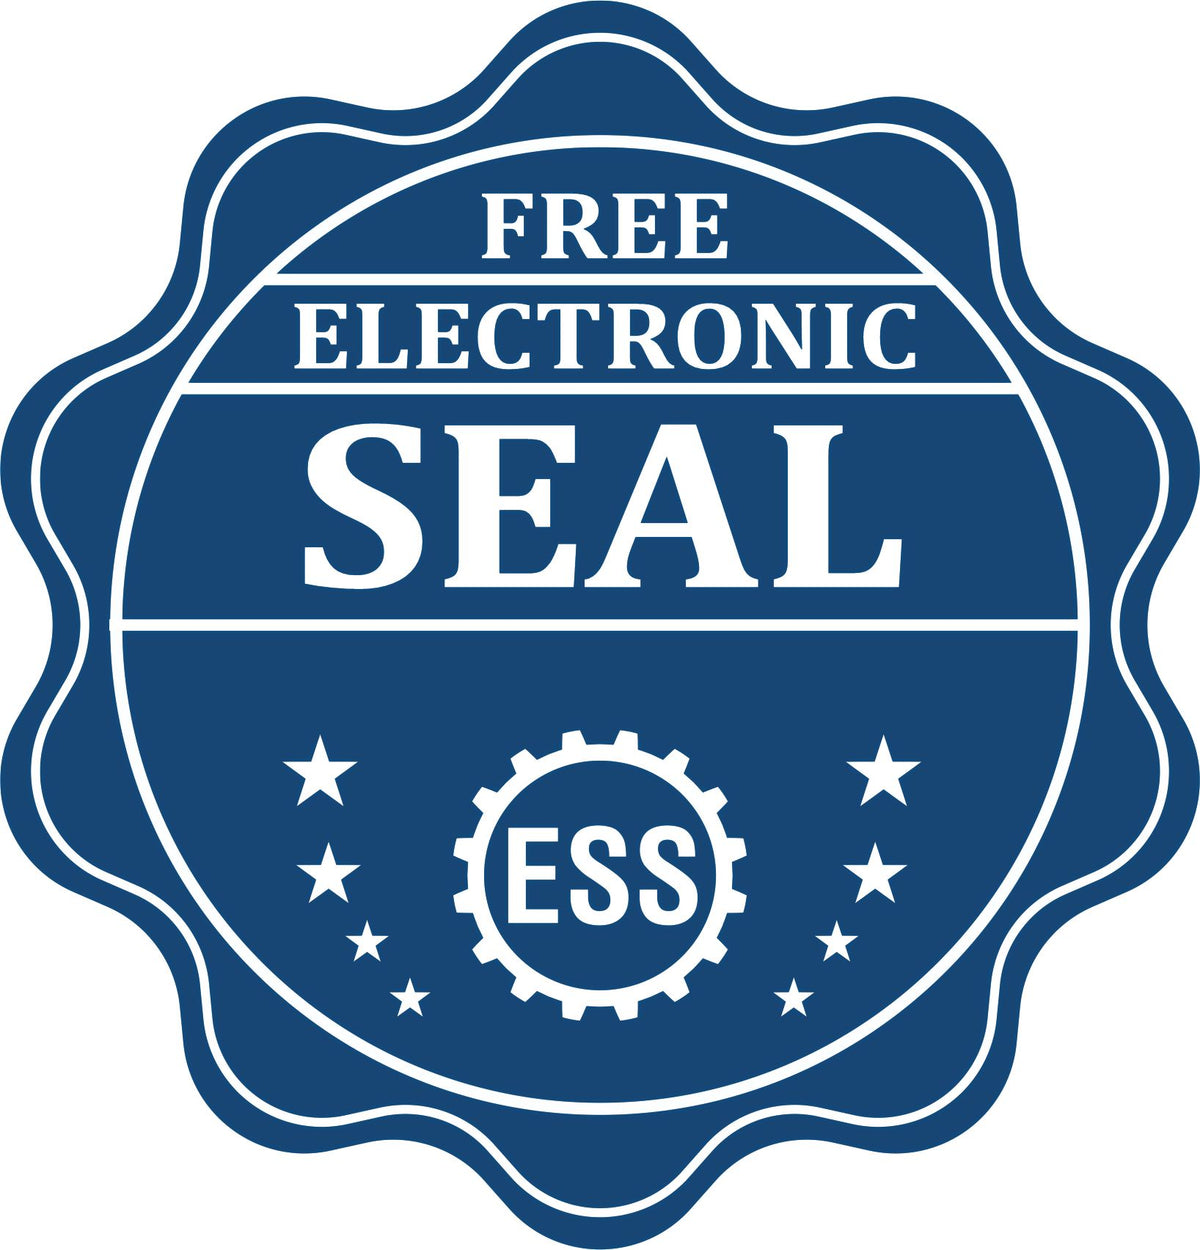 A badge showing a free electronic seal for the Handheld Wyoming Architect Seal Embosser with stars and the ESS gear on the emblem.